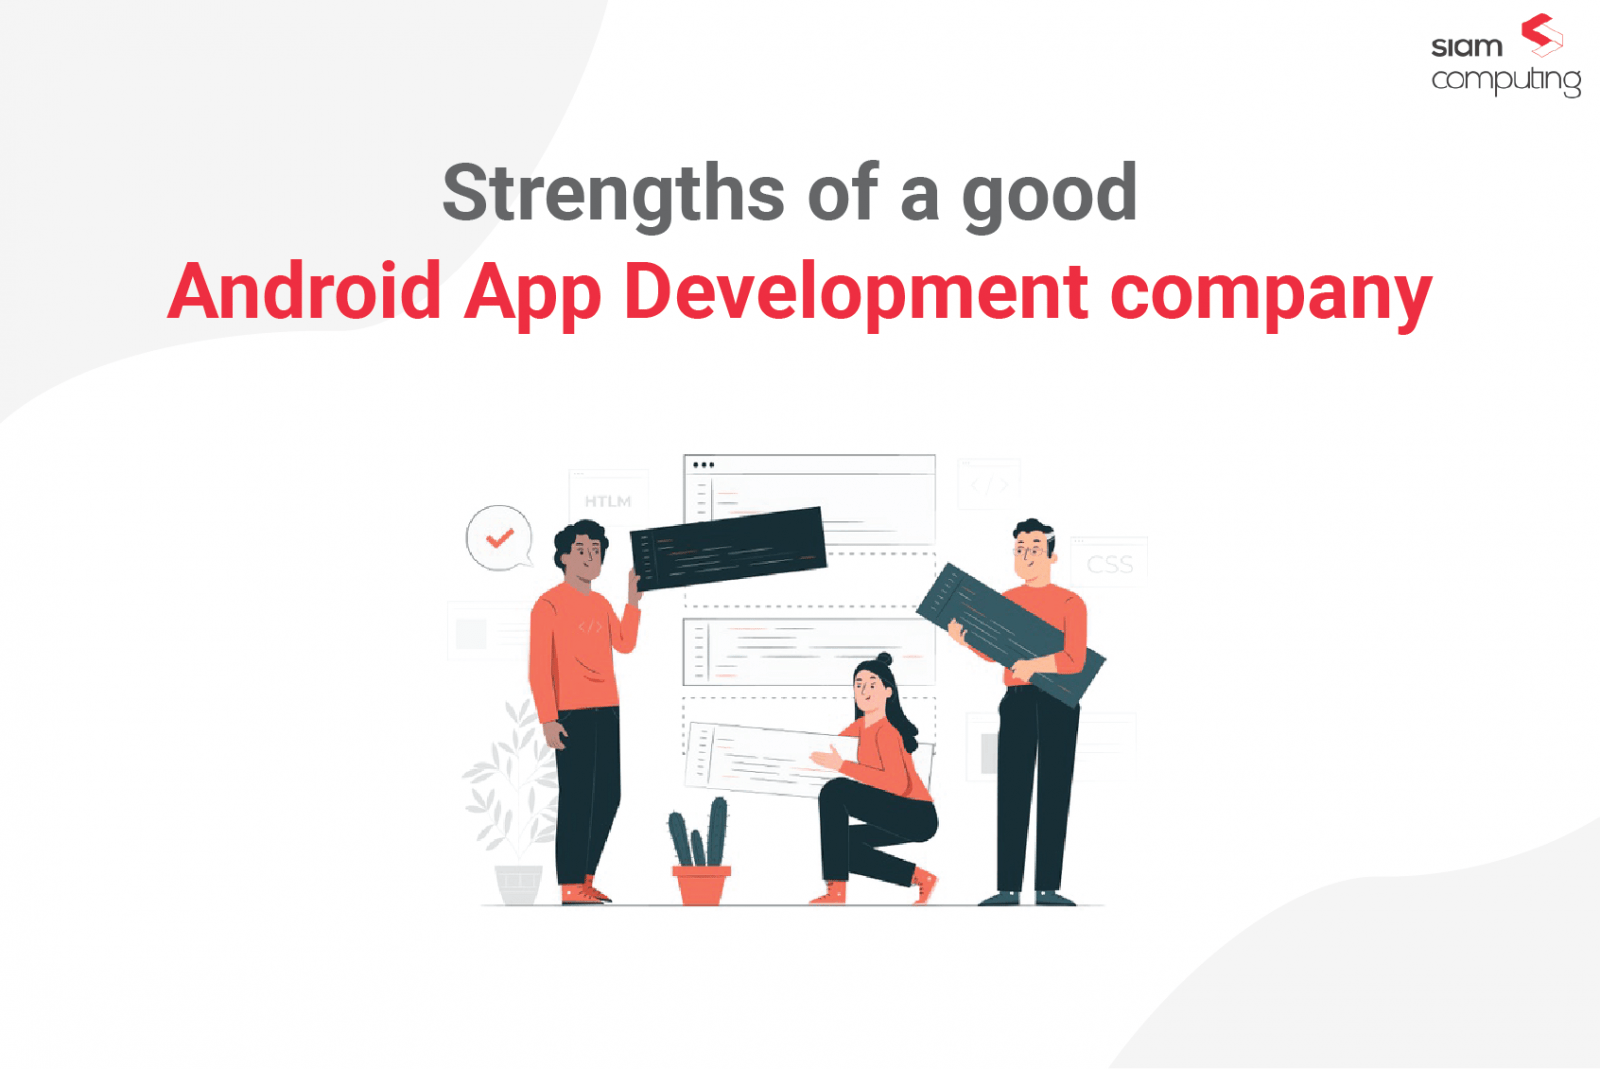 Strengths-of-a-good-android-app-development-company2